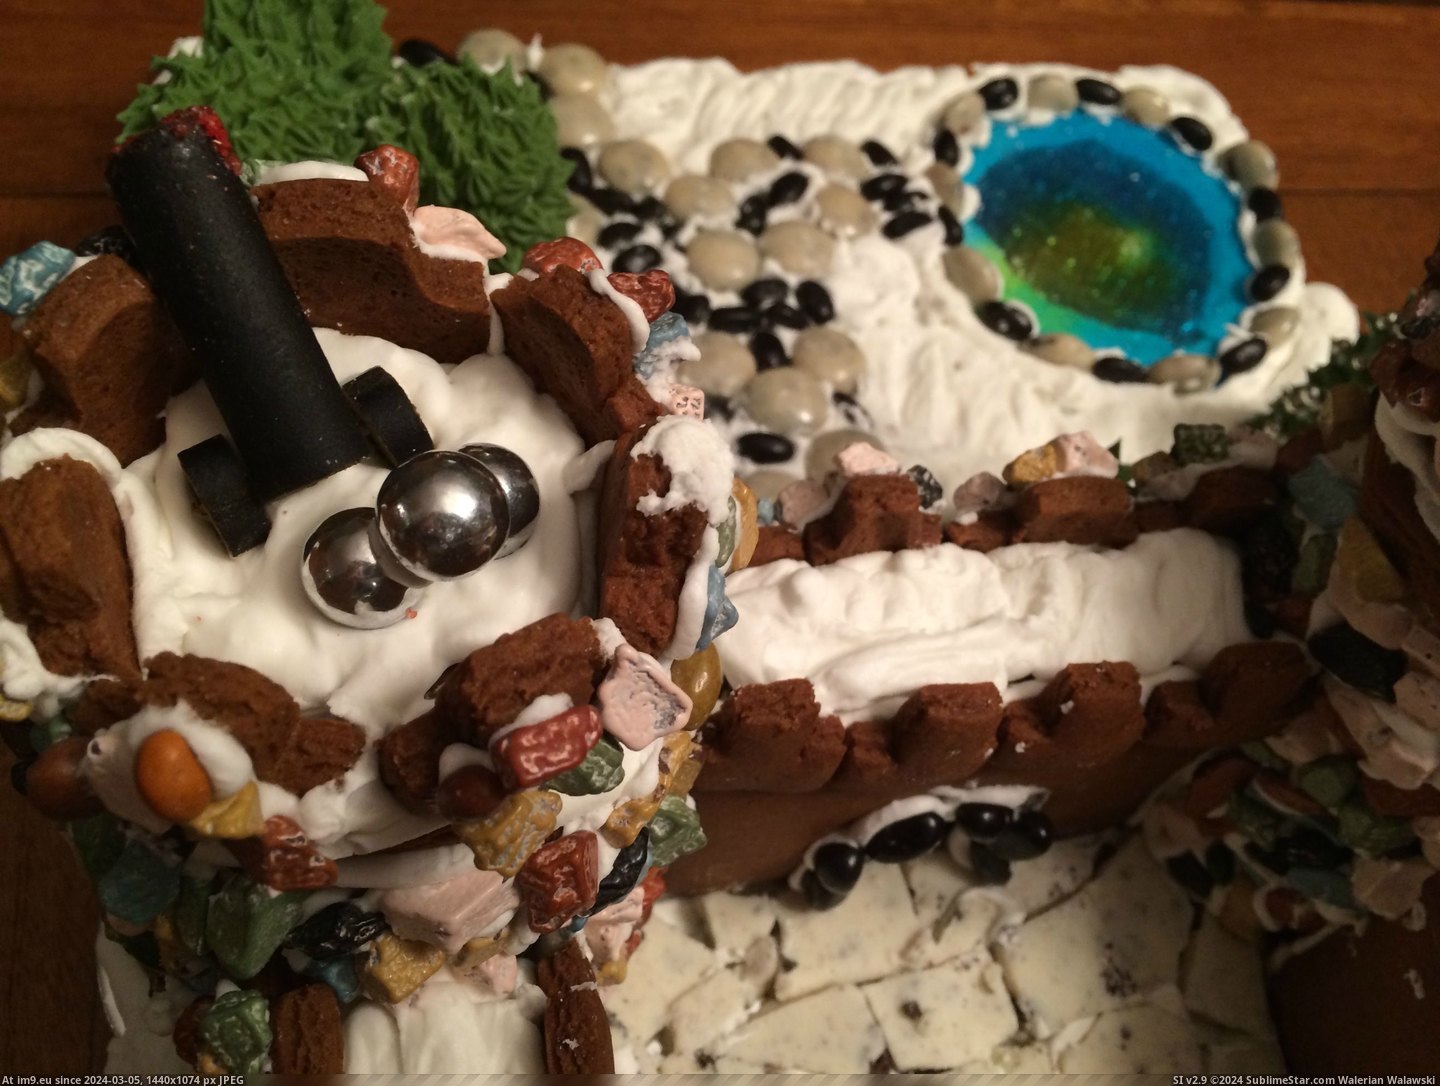 #Husband #Get #Our #Divorced #Collaborated #Project #Gingerbread #Success [Pics] My husband and I collaborated on our first gingerbread project and didn't get divorced...success! 7 Pic. (Obraz z album My r/PICS favs))